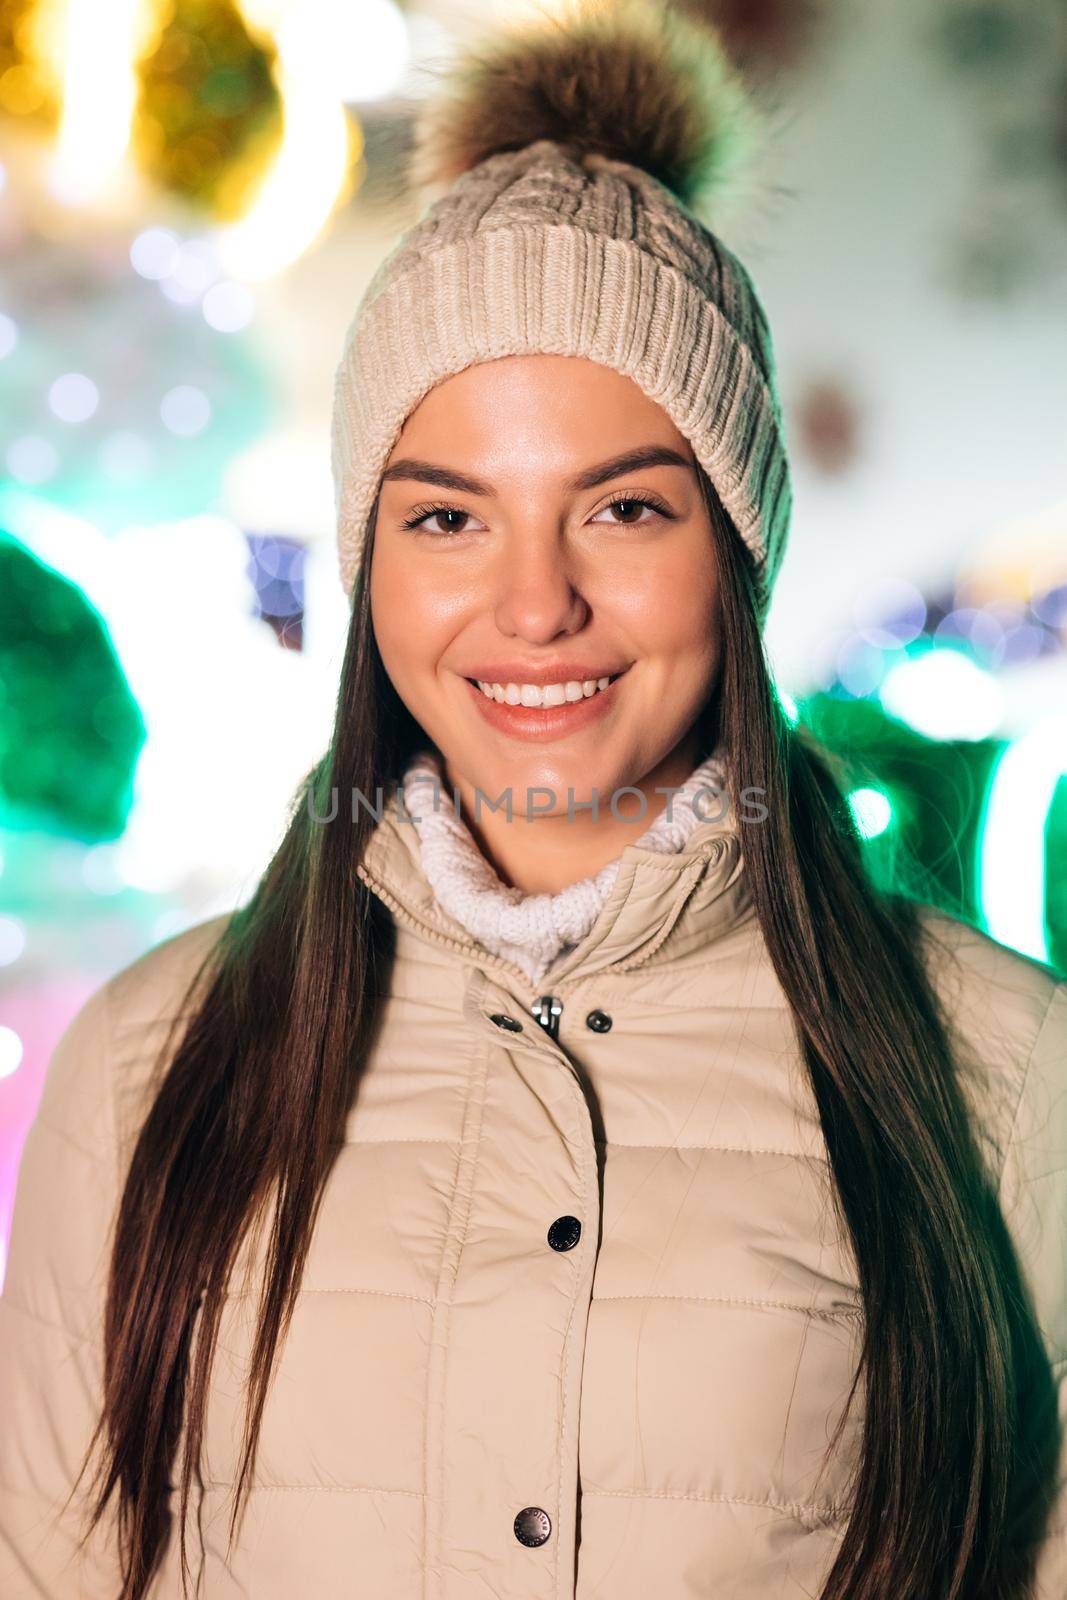 Portrait of joyful caucasian woman in hat looking at camera smiling around Christmas lights in city center. Positive mood happy emotion standing outdoor. Winter beautiful street face outdoor.